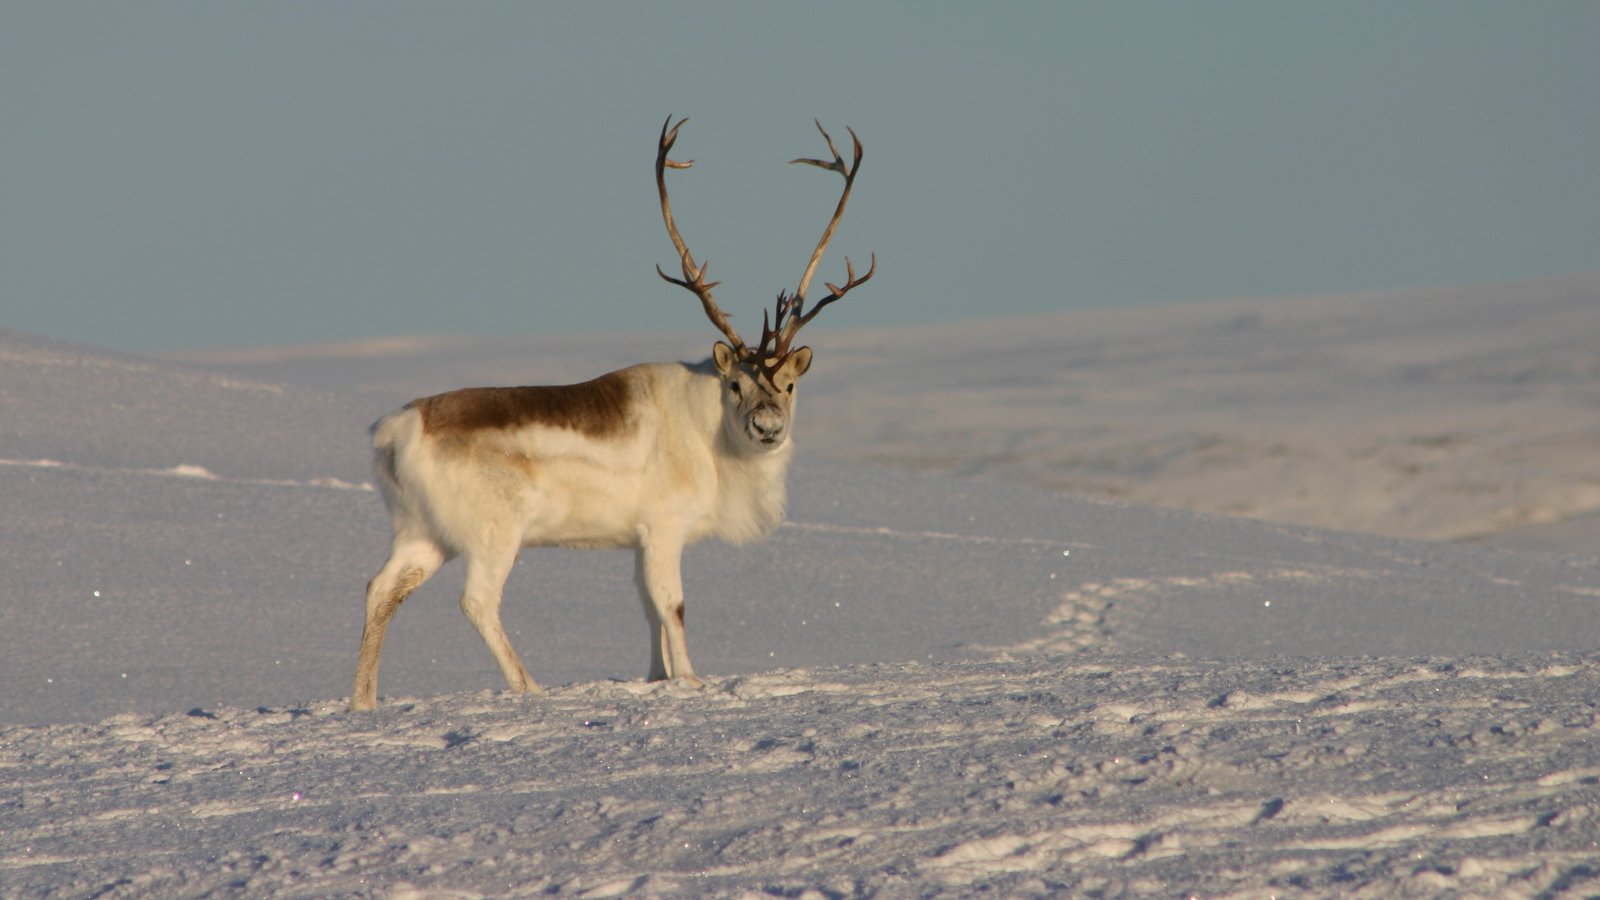 A healthy male peary caribou stands on guard. Picture taken in the high arctic.